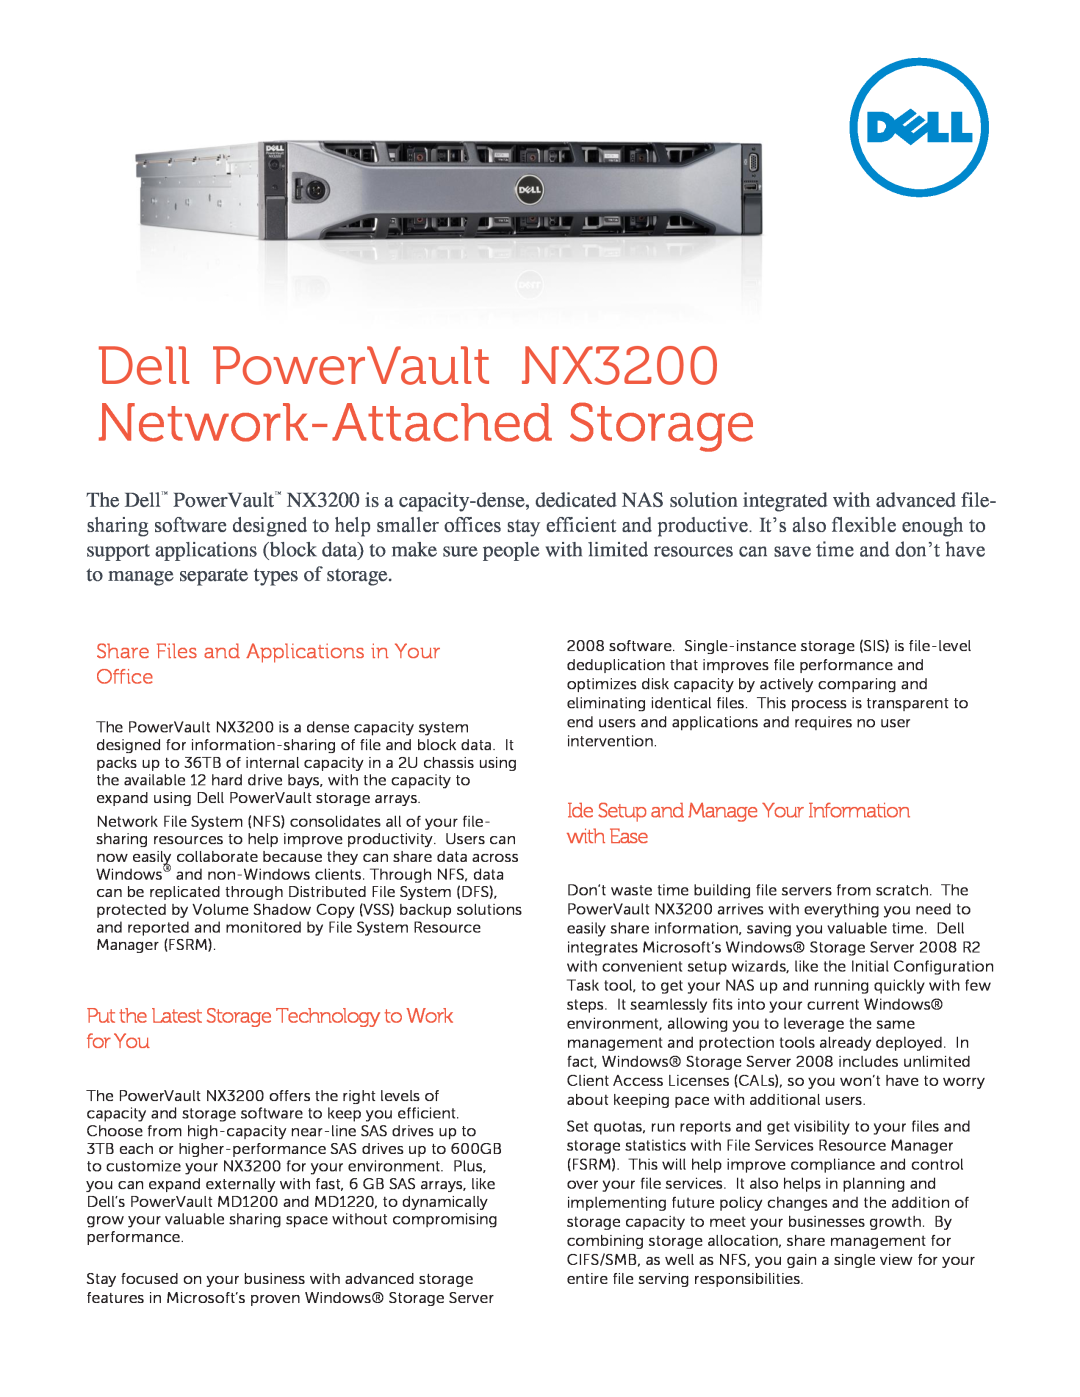 Dell manual Dell PowerVault NX3200 Network-Attached Storage, Share Files and Applications in Your Office 